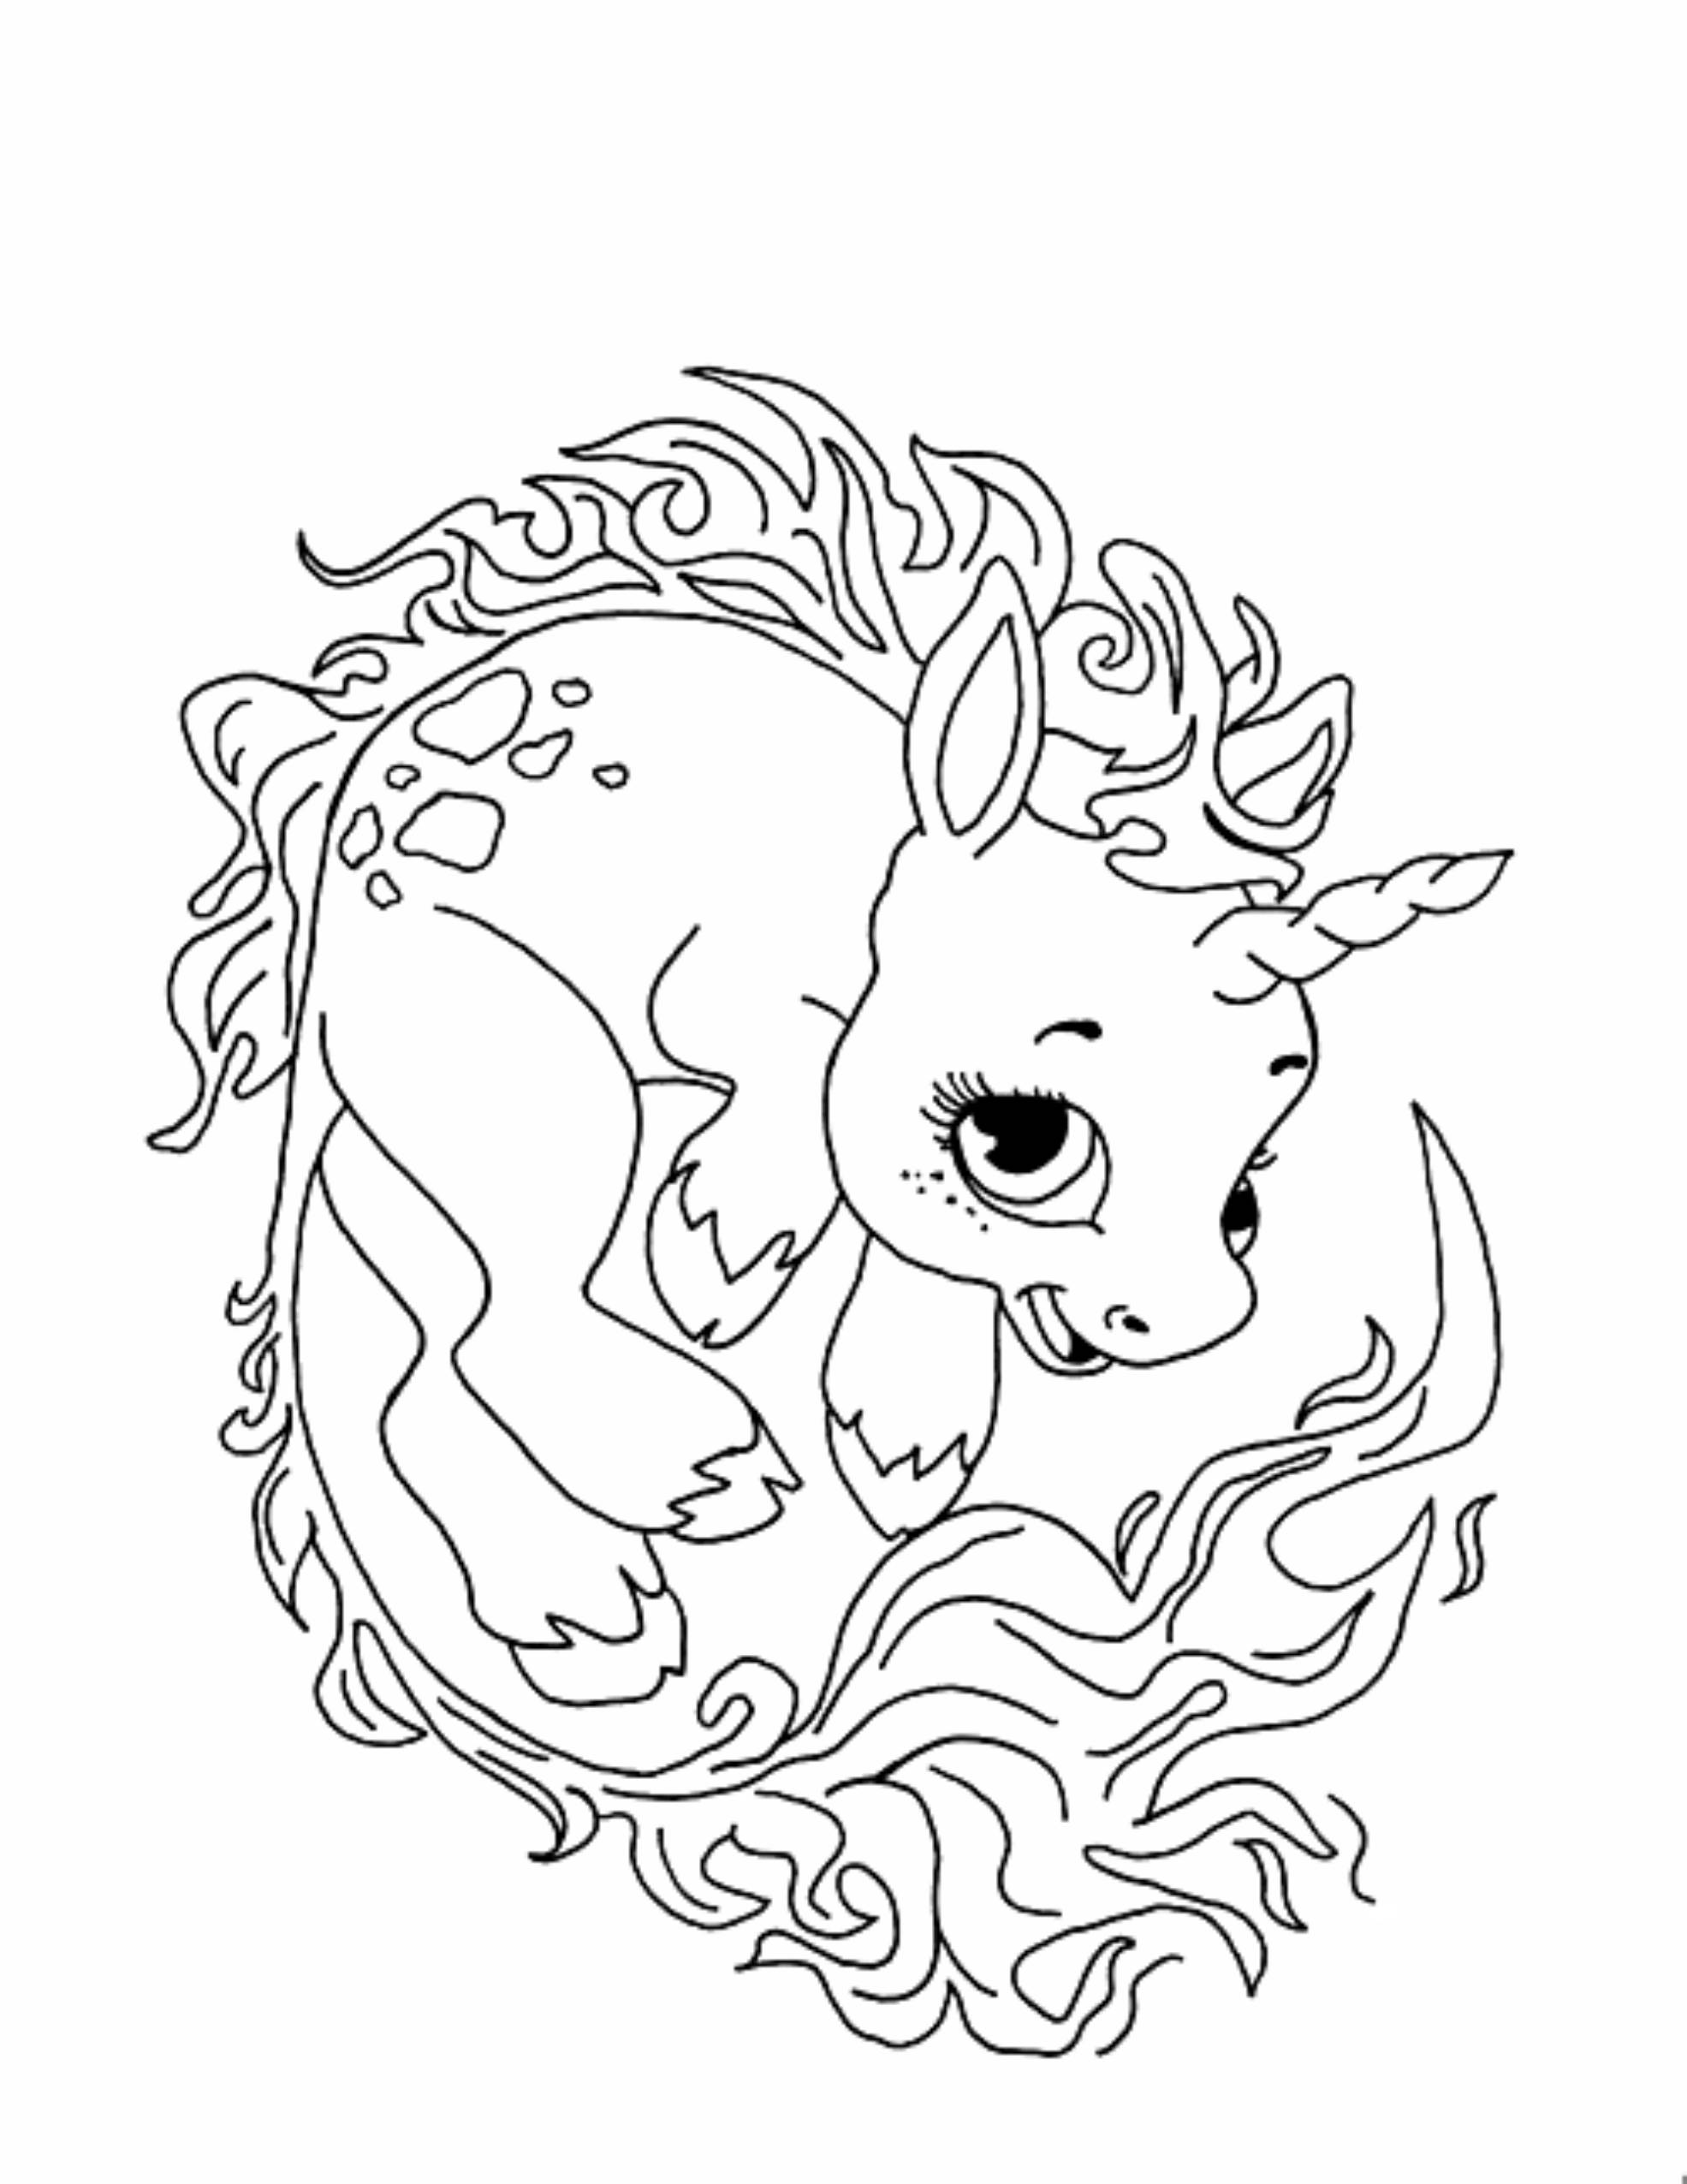 Free Printable Unicorn Coloring Page Download Free Printable Unicorn Coloring Page Png Images 